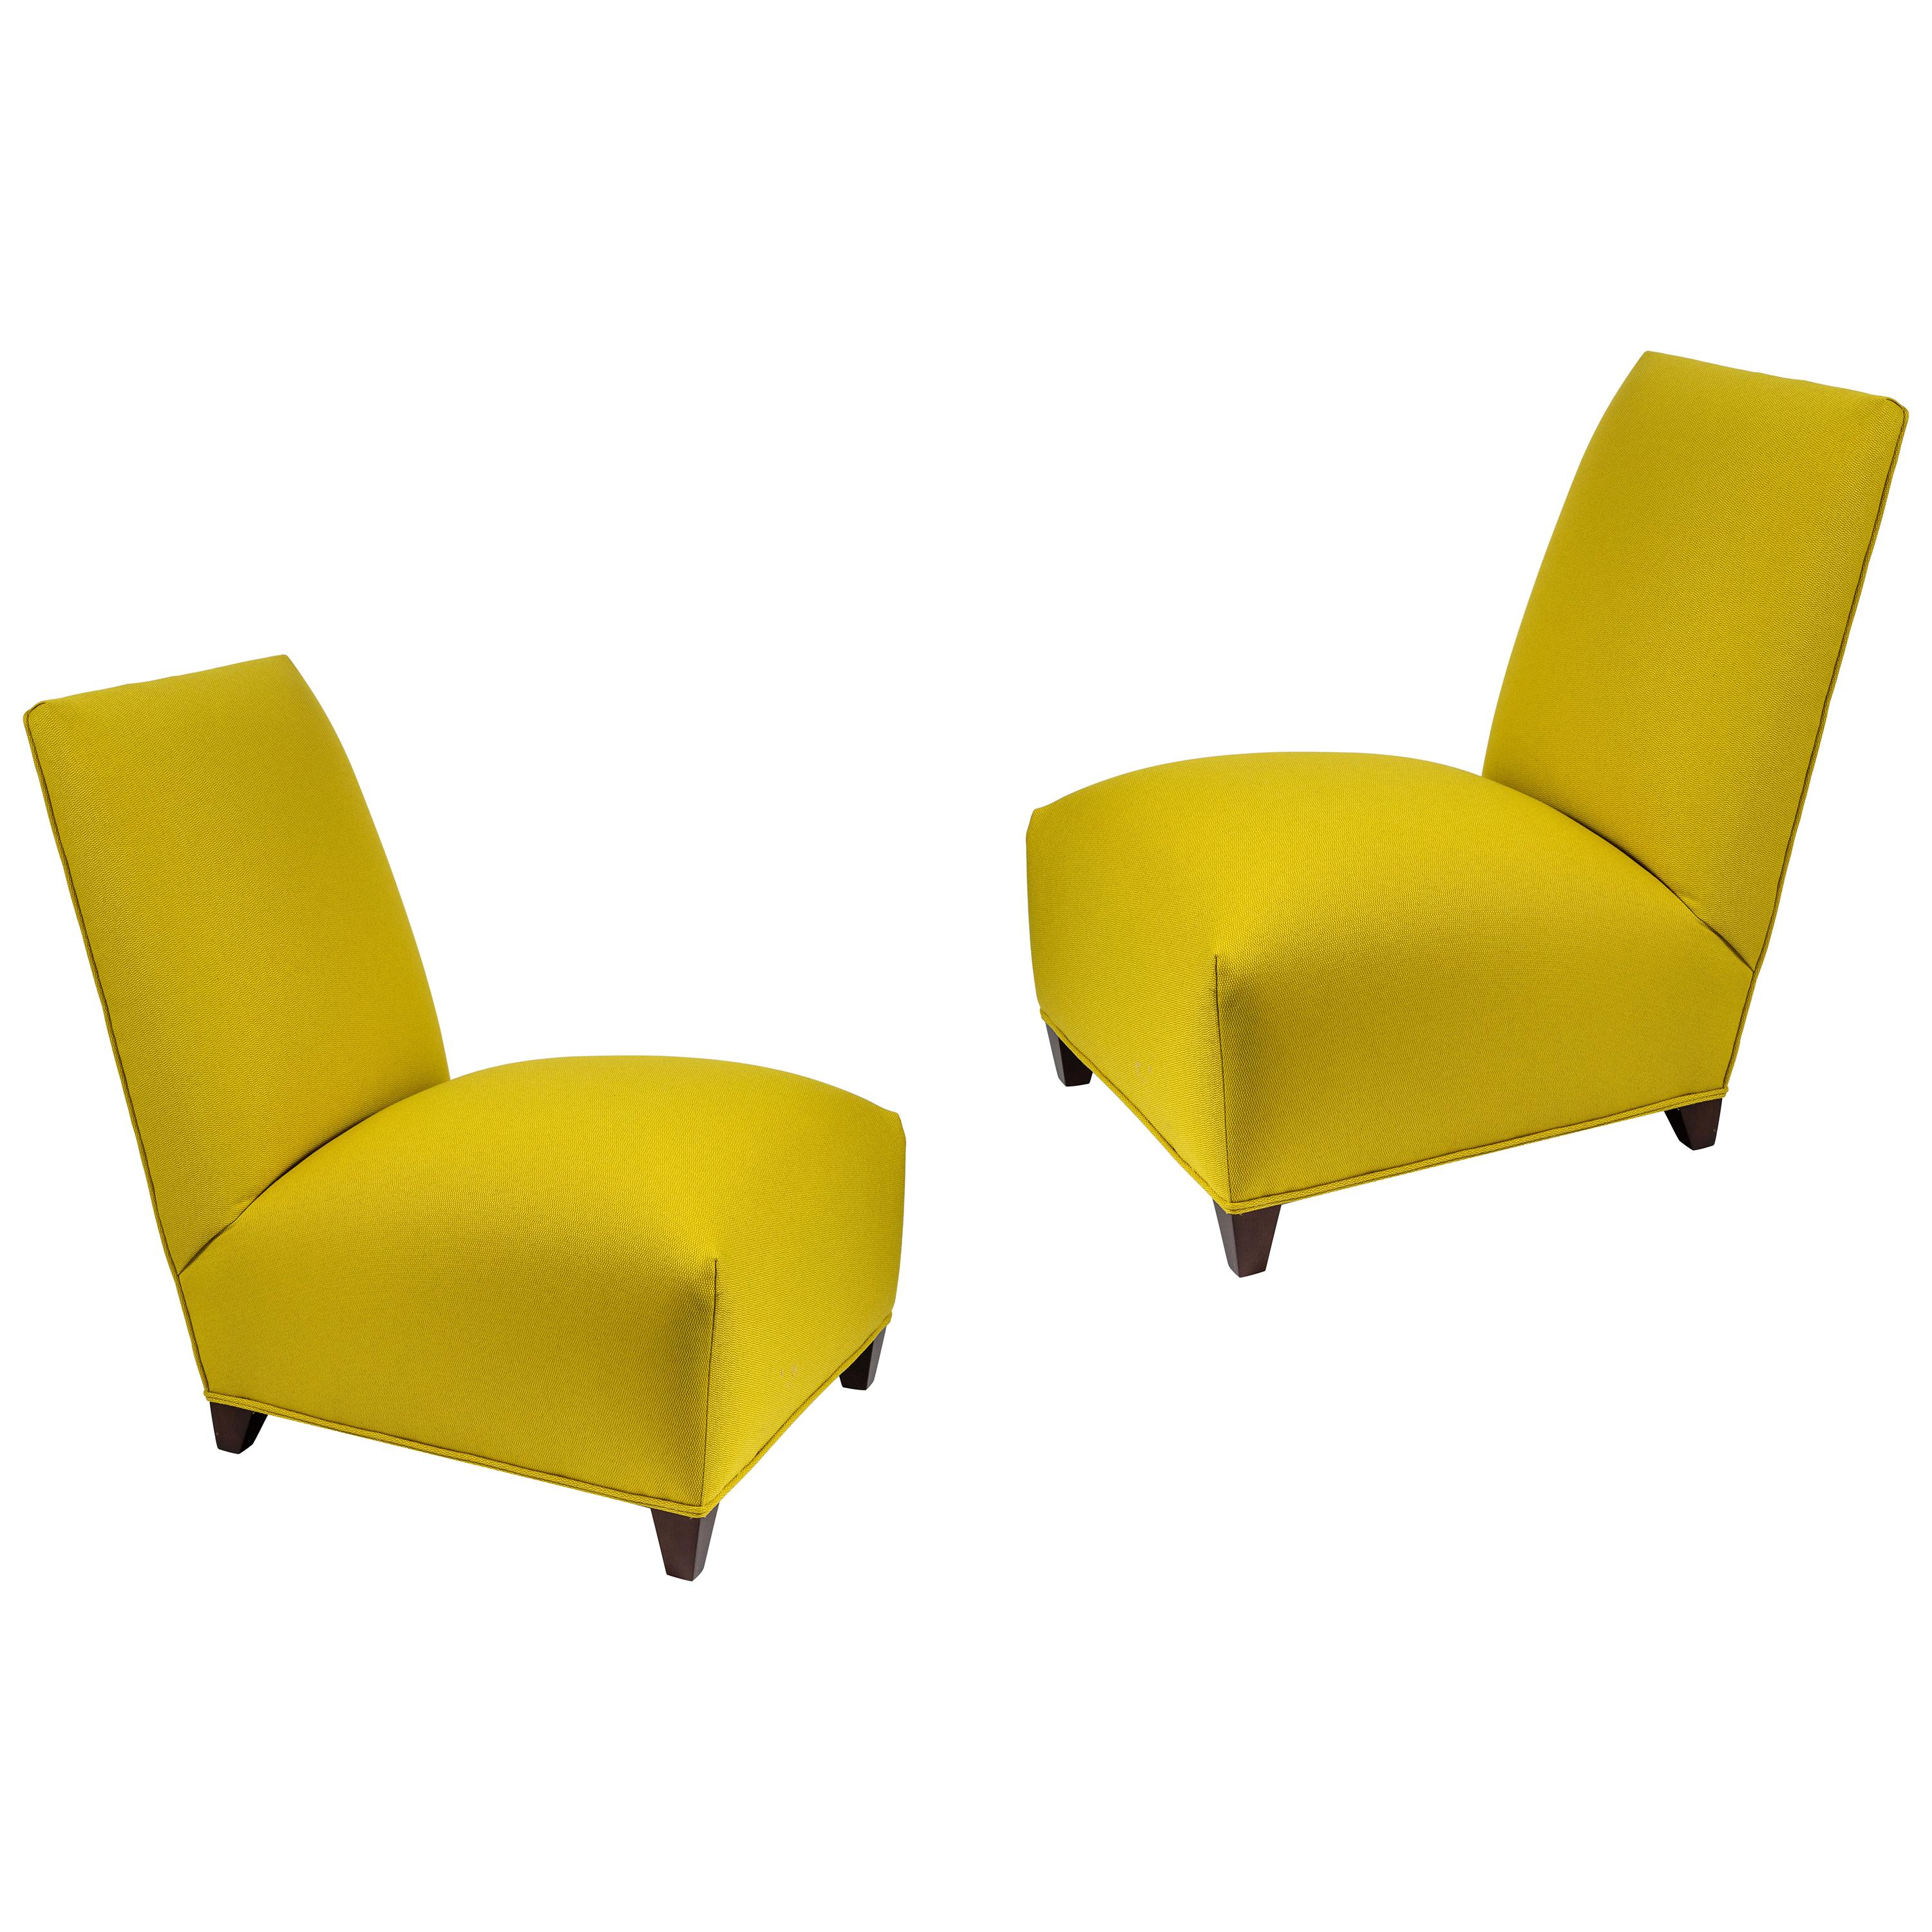 Pair of Chic Slipper Chairs by Donghia, 1980s